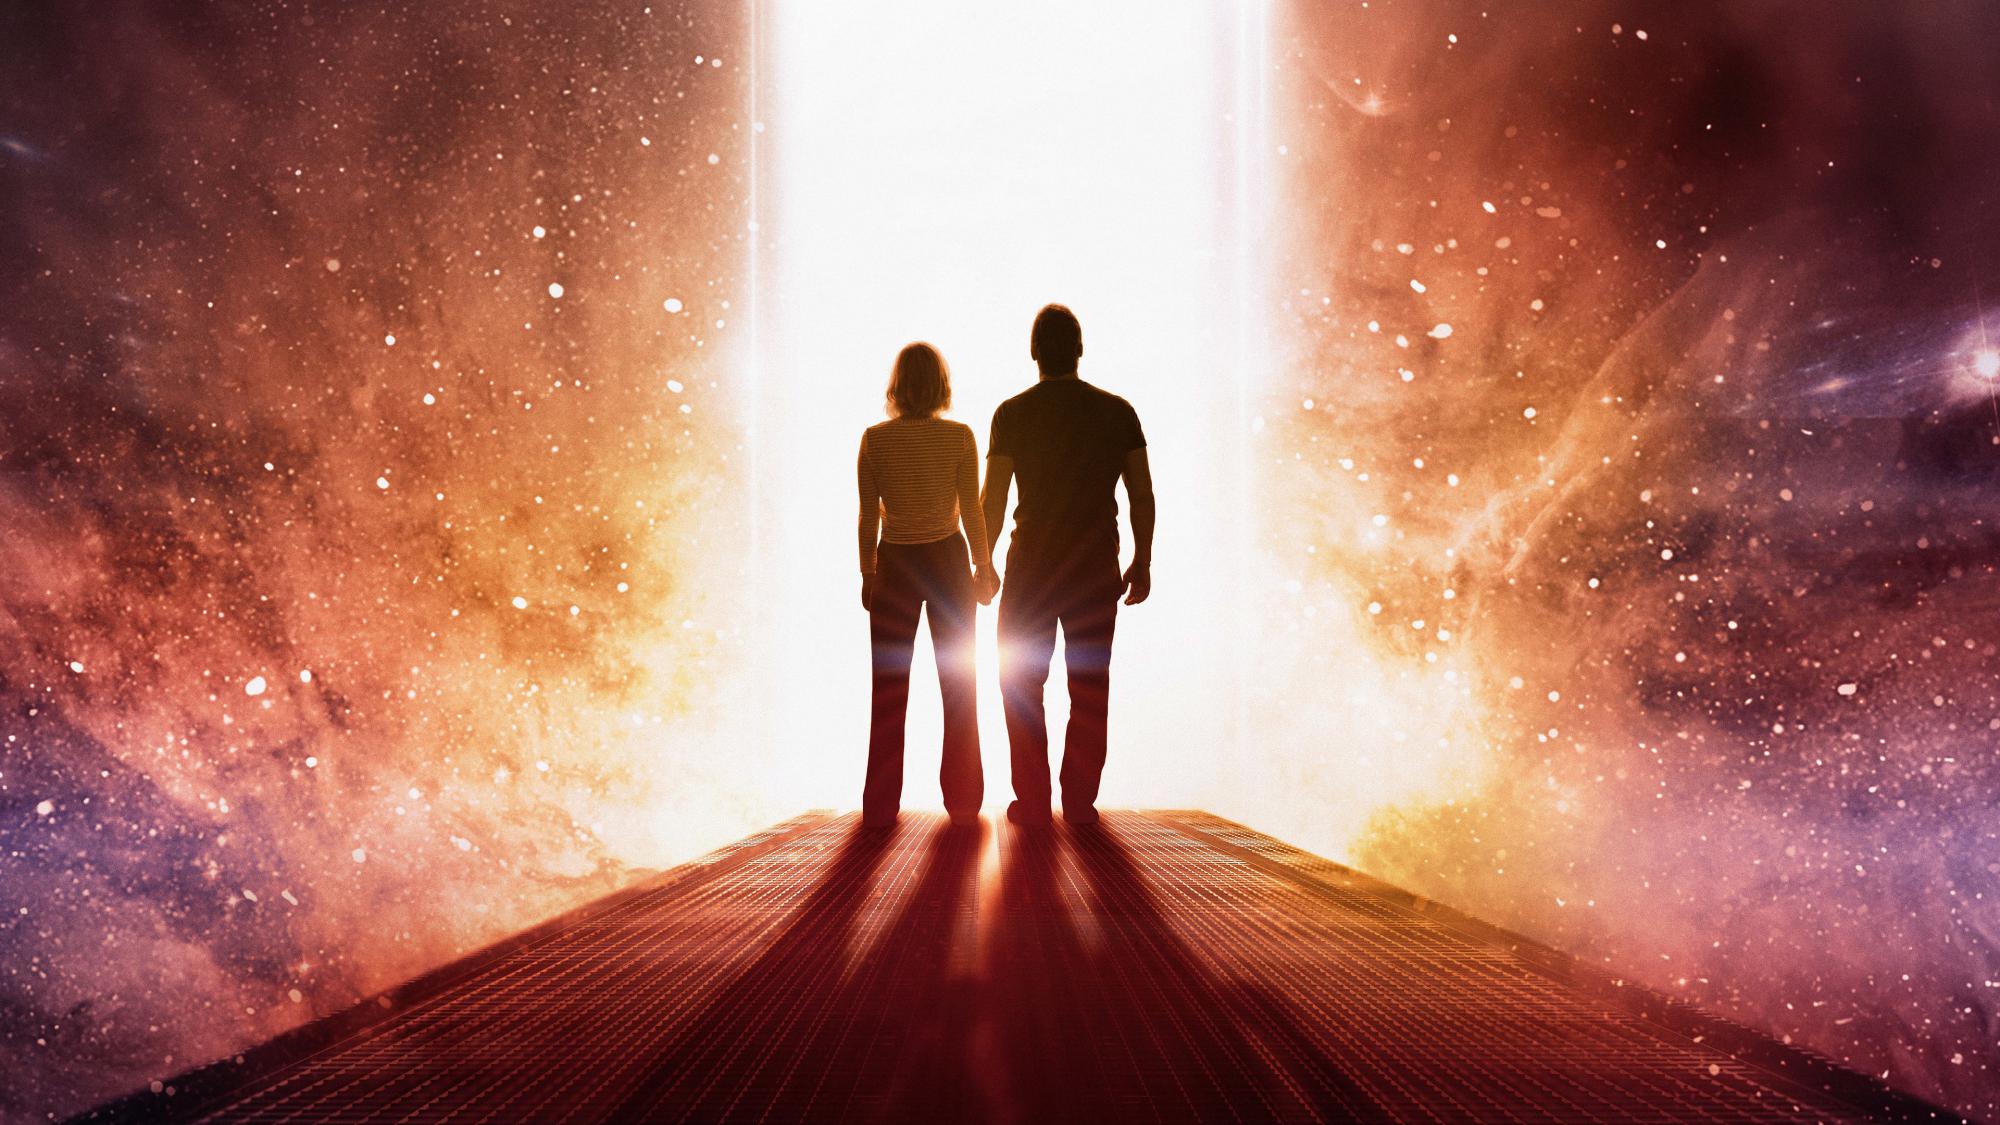 Backdrop Image for Passengers